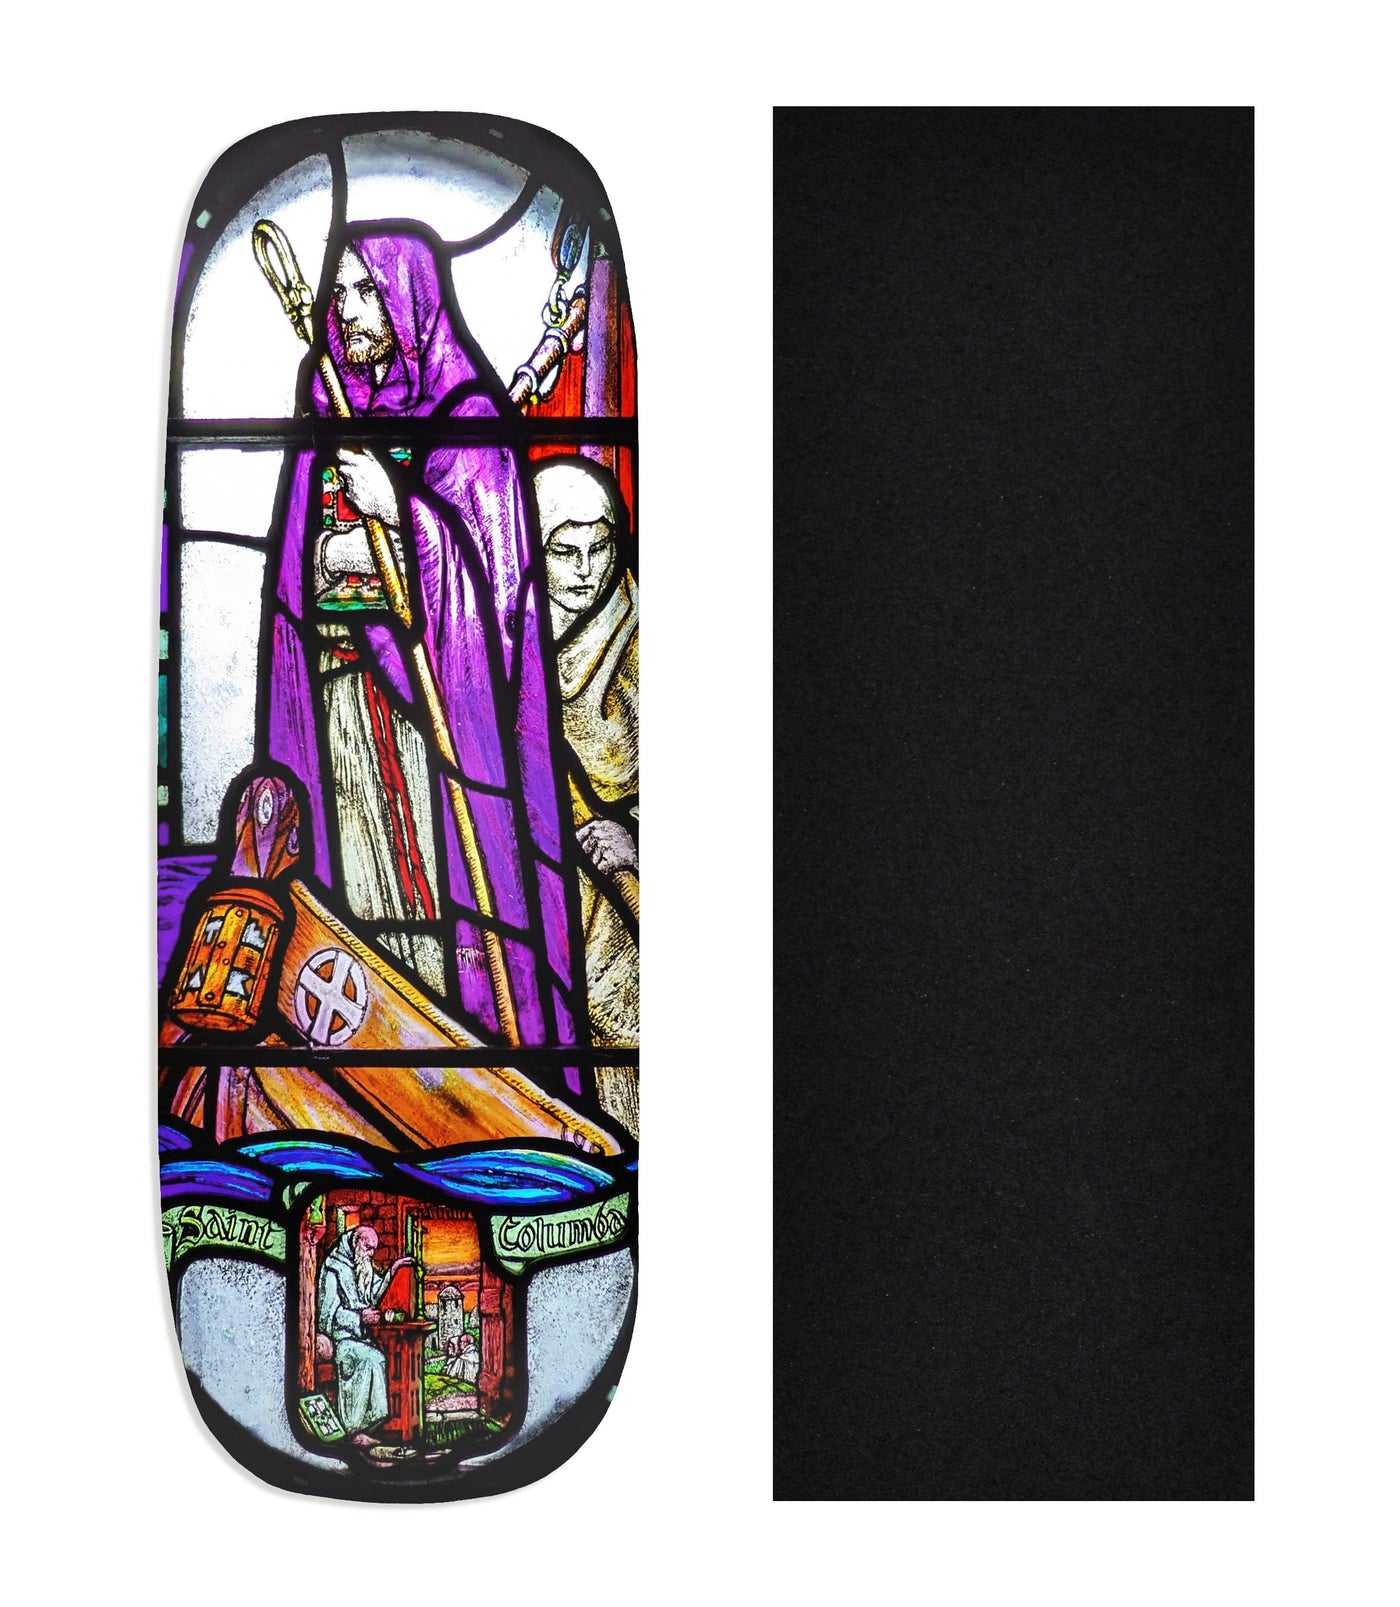 Teak Tuning Heat Transfer Graphic Wooden Fingerboard Deck, "St. Columba Stained Glass" Boxy Deck